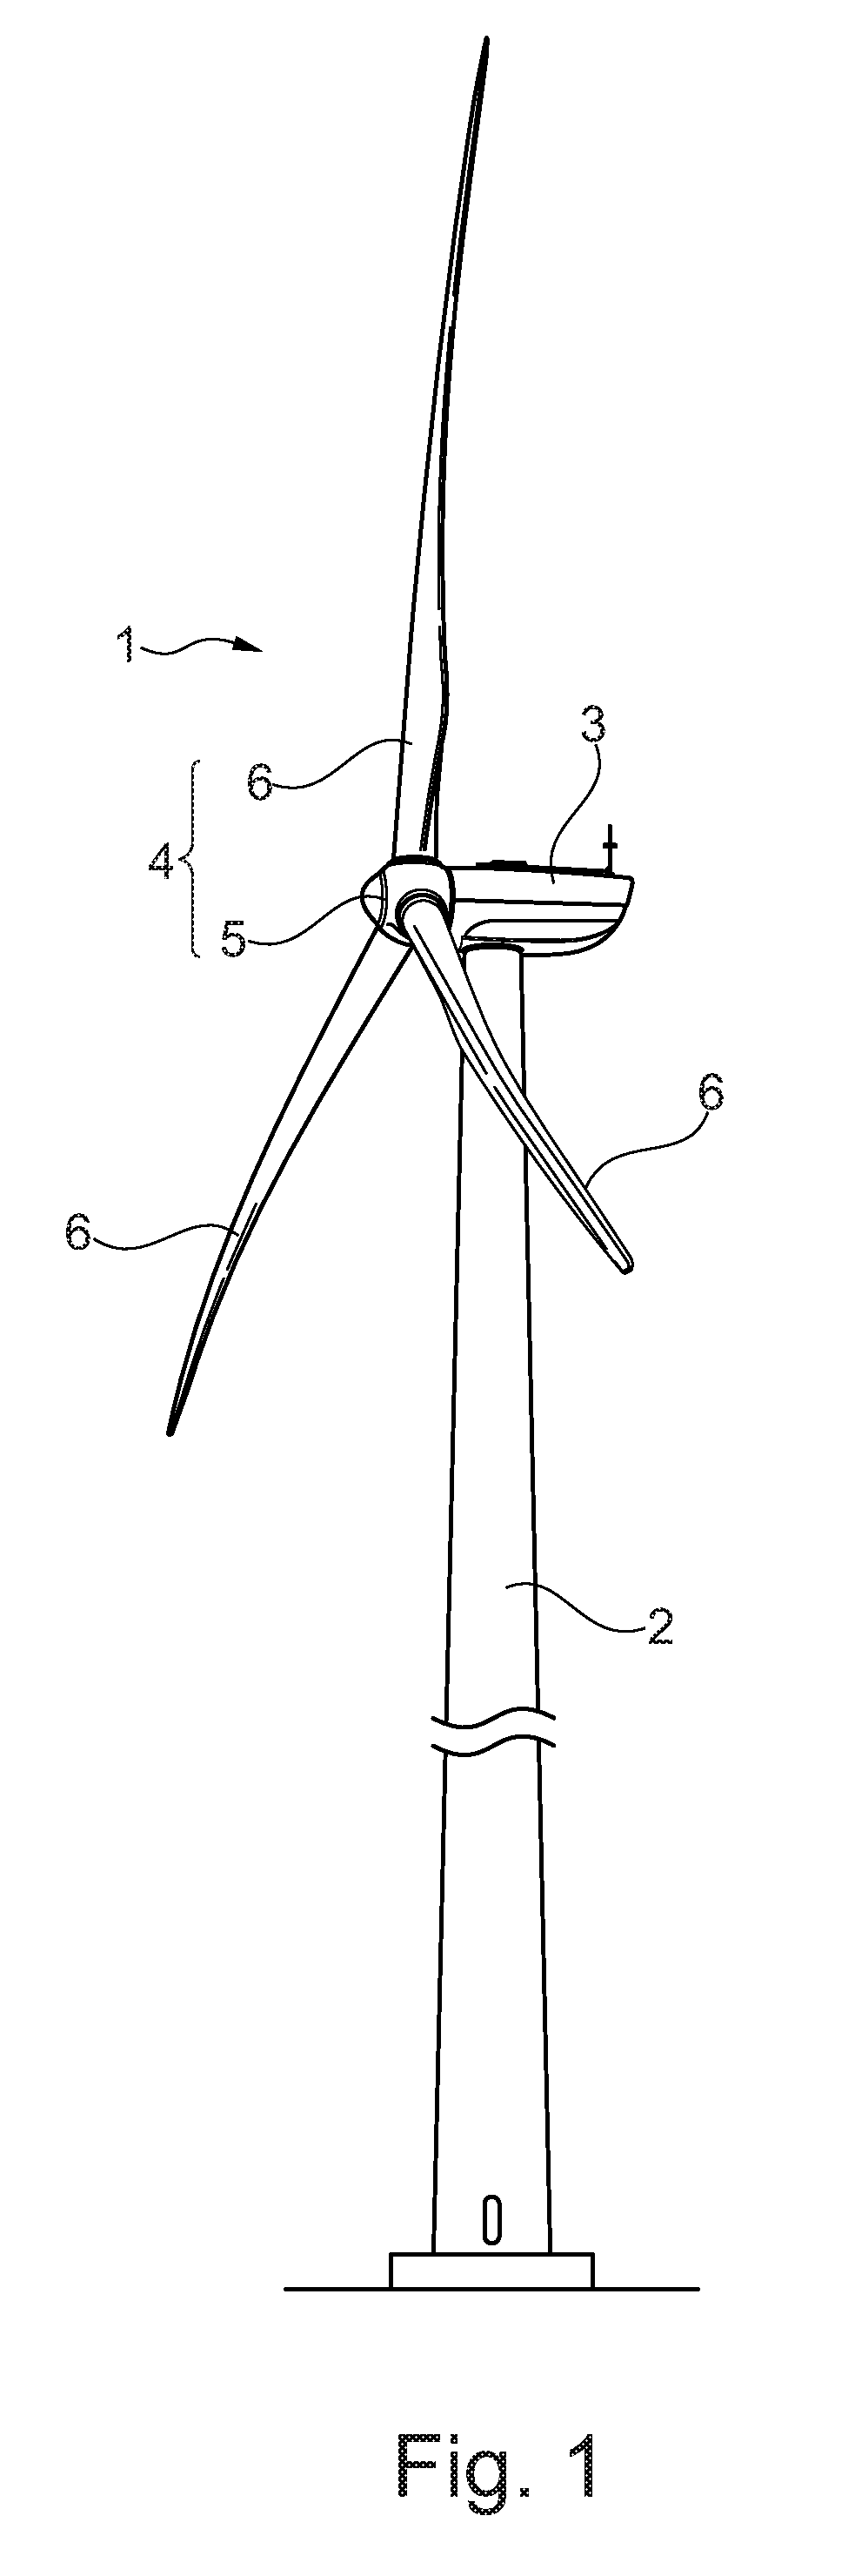 Wind Turbine Comprising a Yaw Bearing System